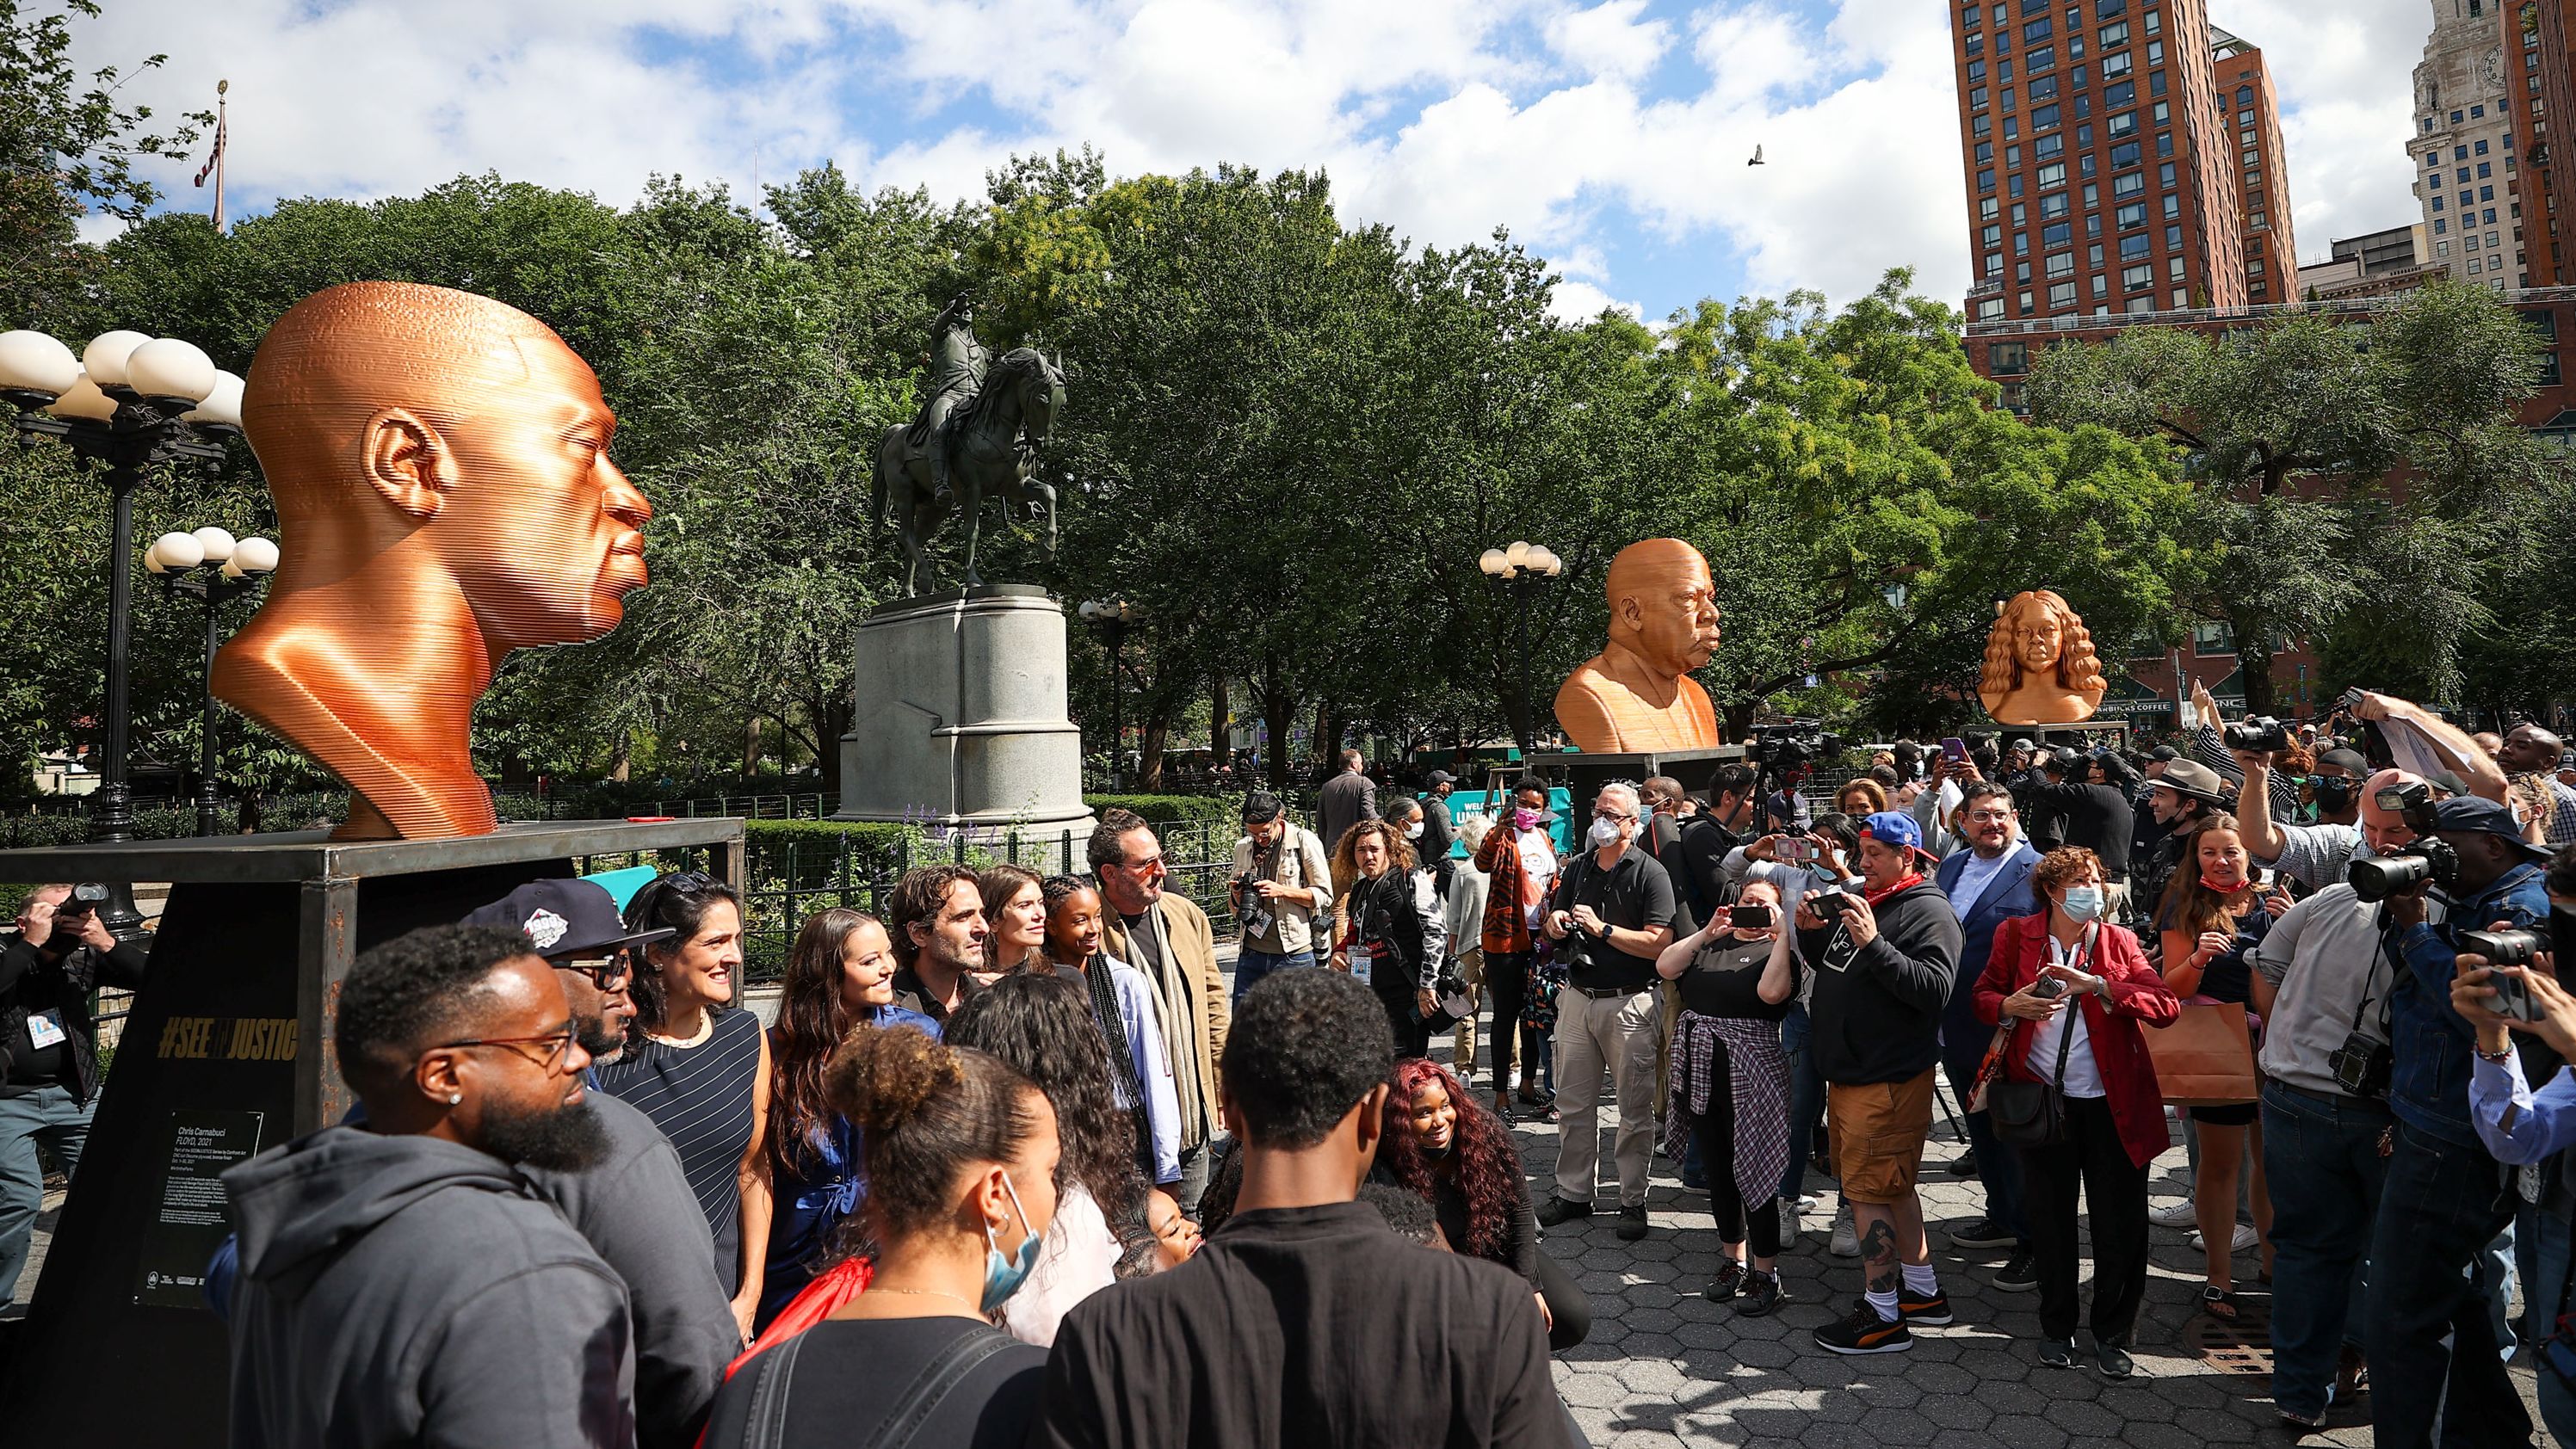 Statues are placed at Union Square in New York City on September 30.